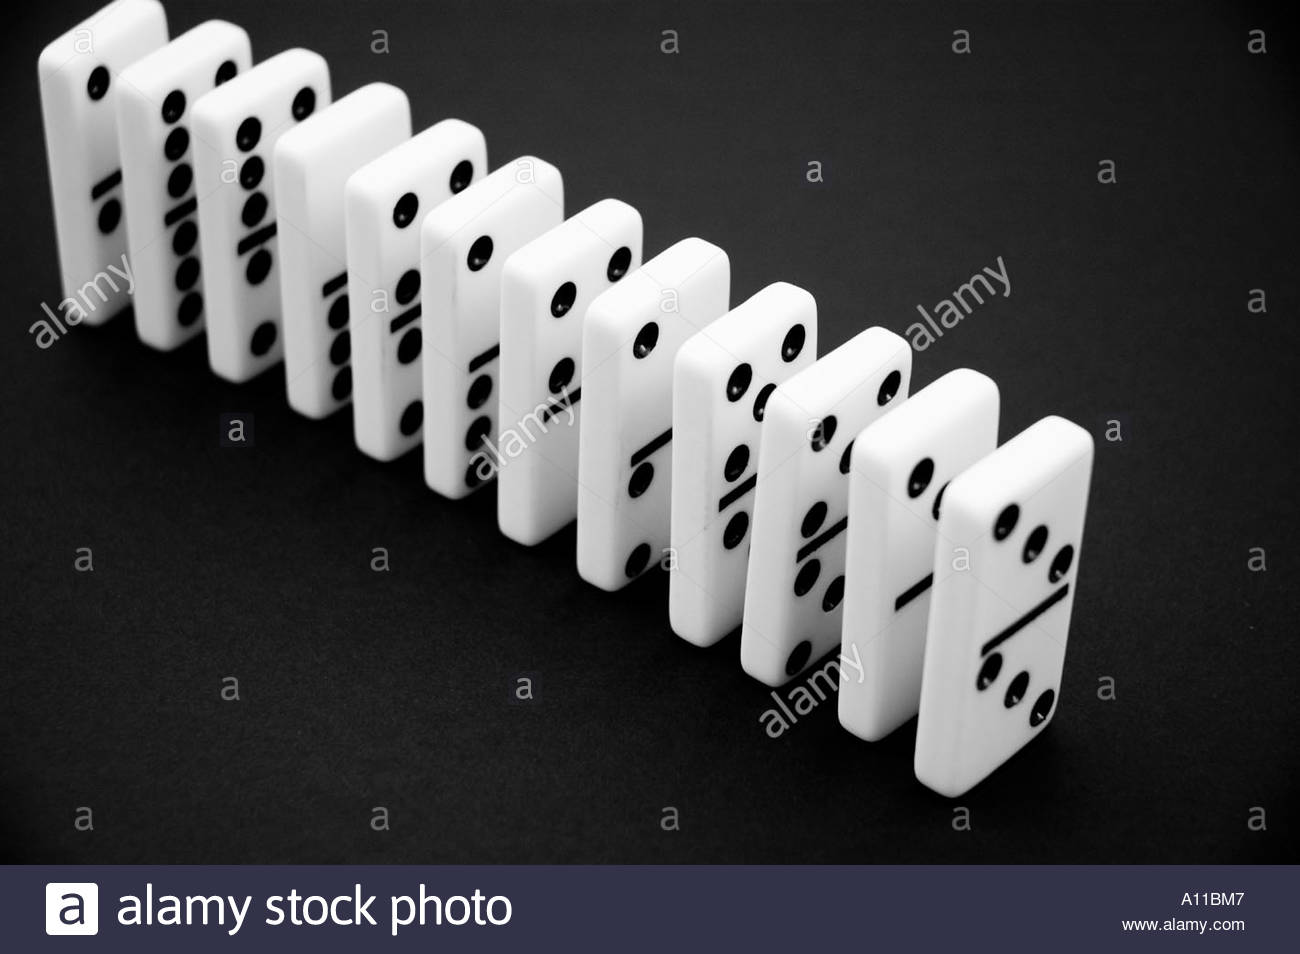 Dominos in a row on a black background Stock Photo 5777798   Alamy